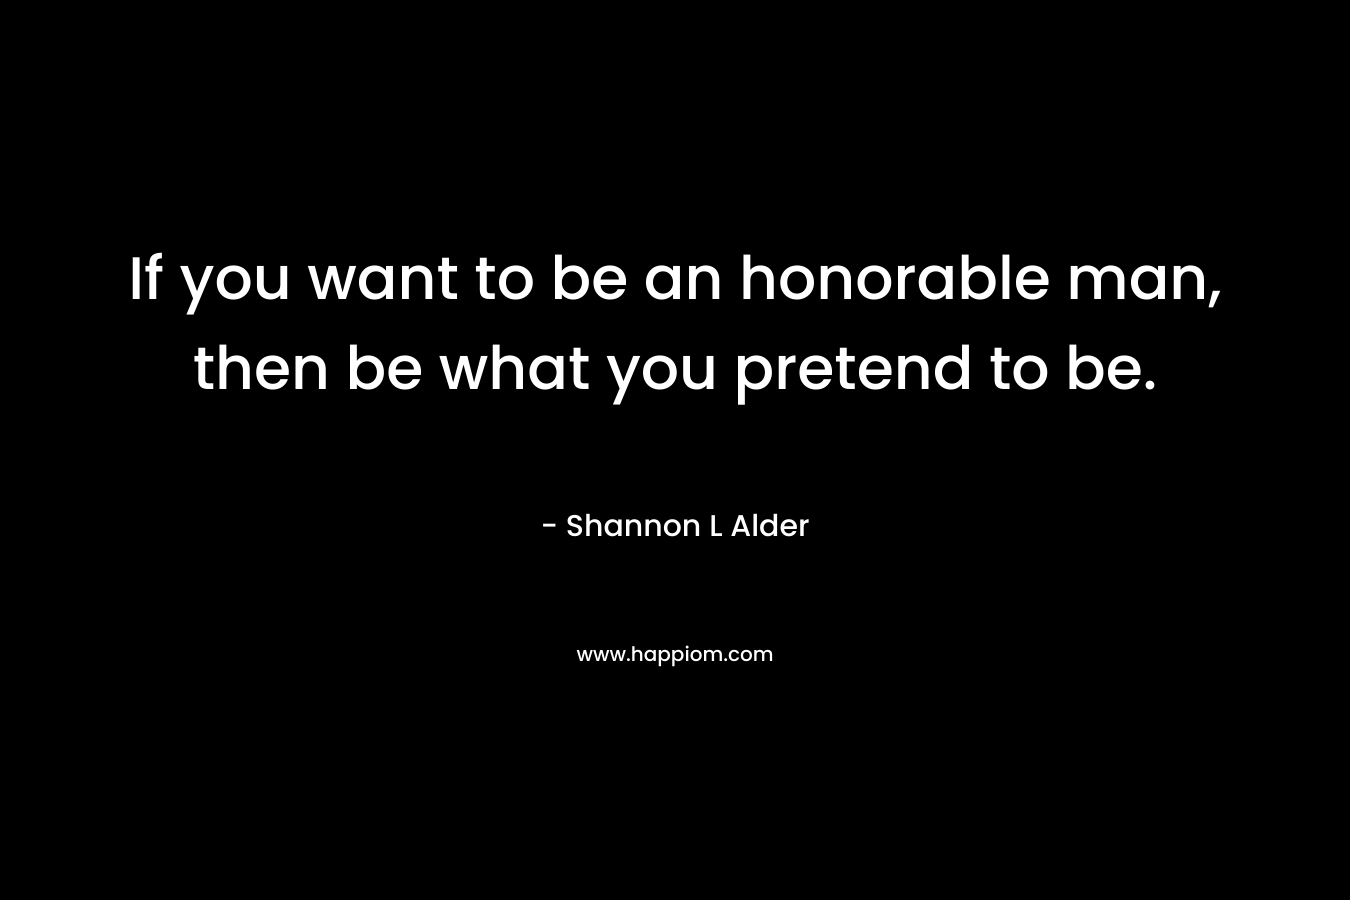 If you want to be an honorable man, then be what you pretend to be.